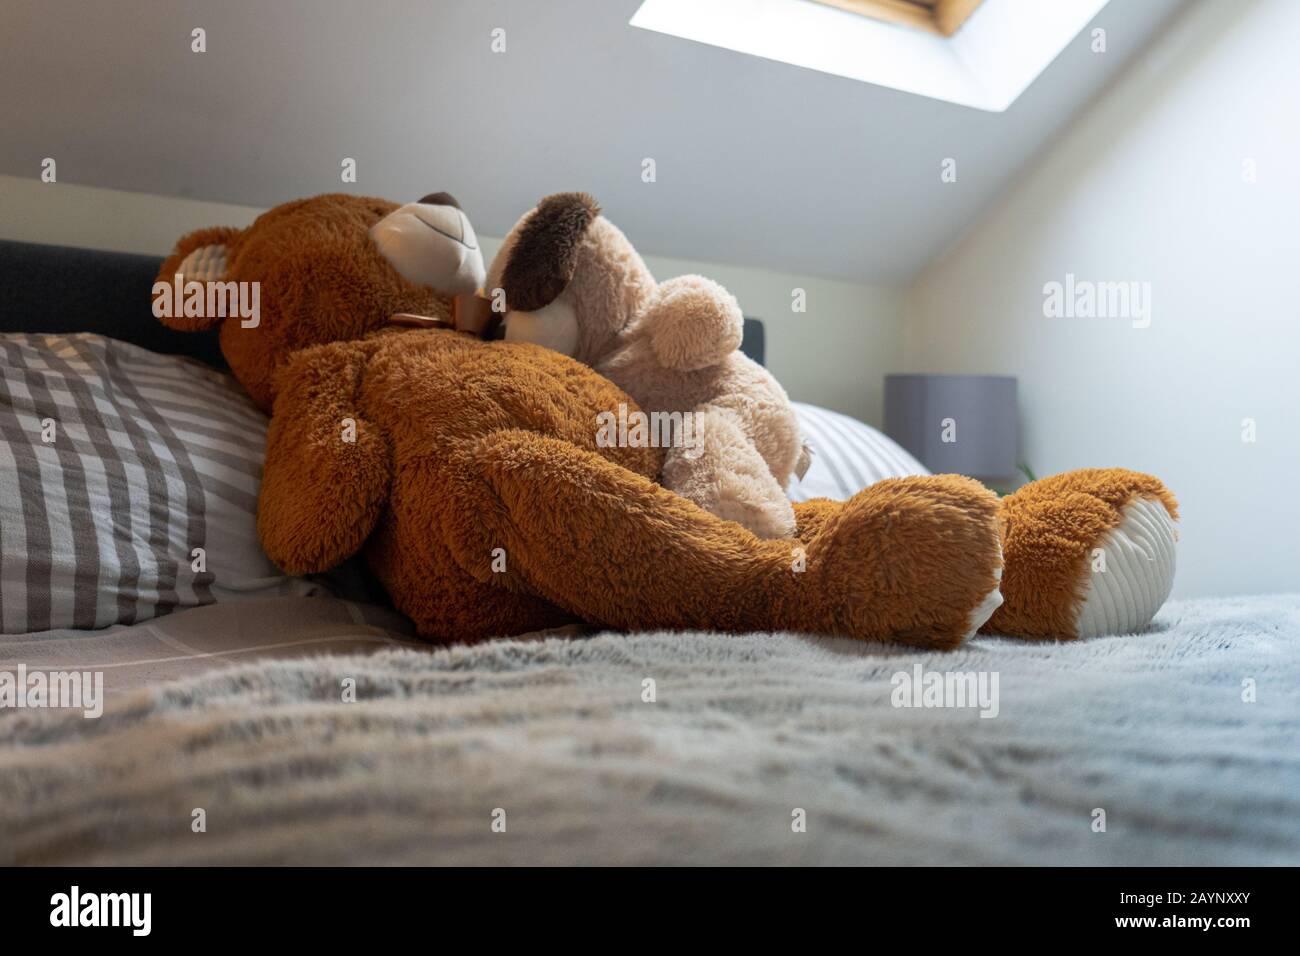 A modern bedroom lit by a skylight with two teddy bears cuddling on the bed  Stock Photo - Alamy